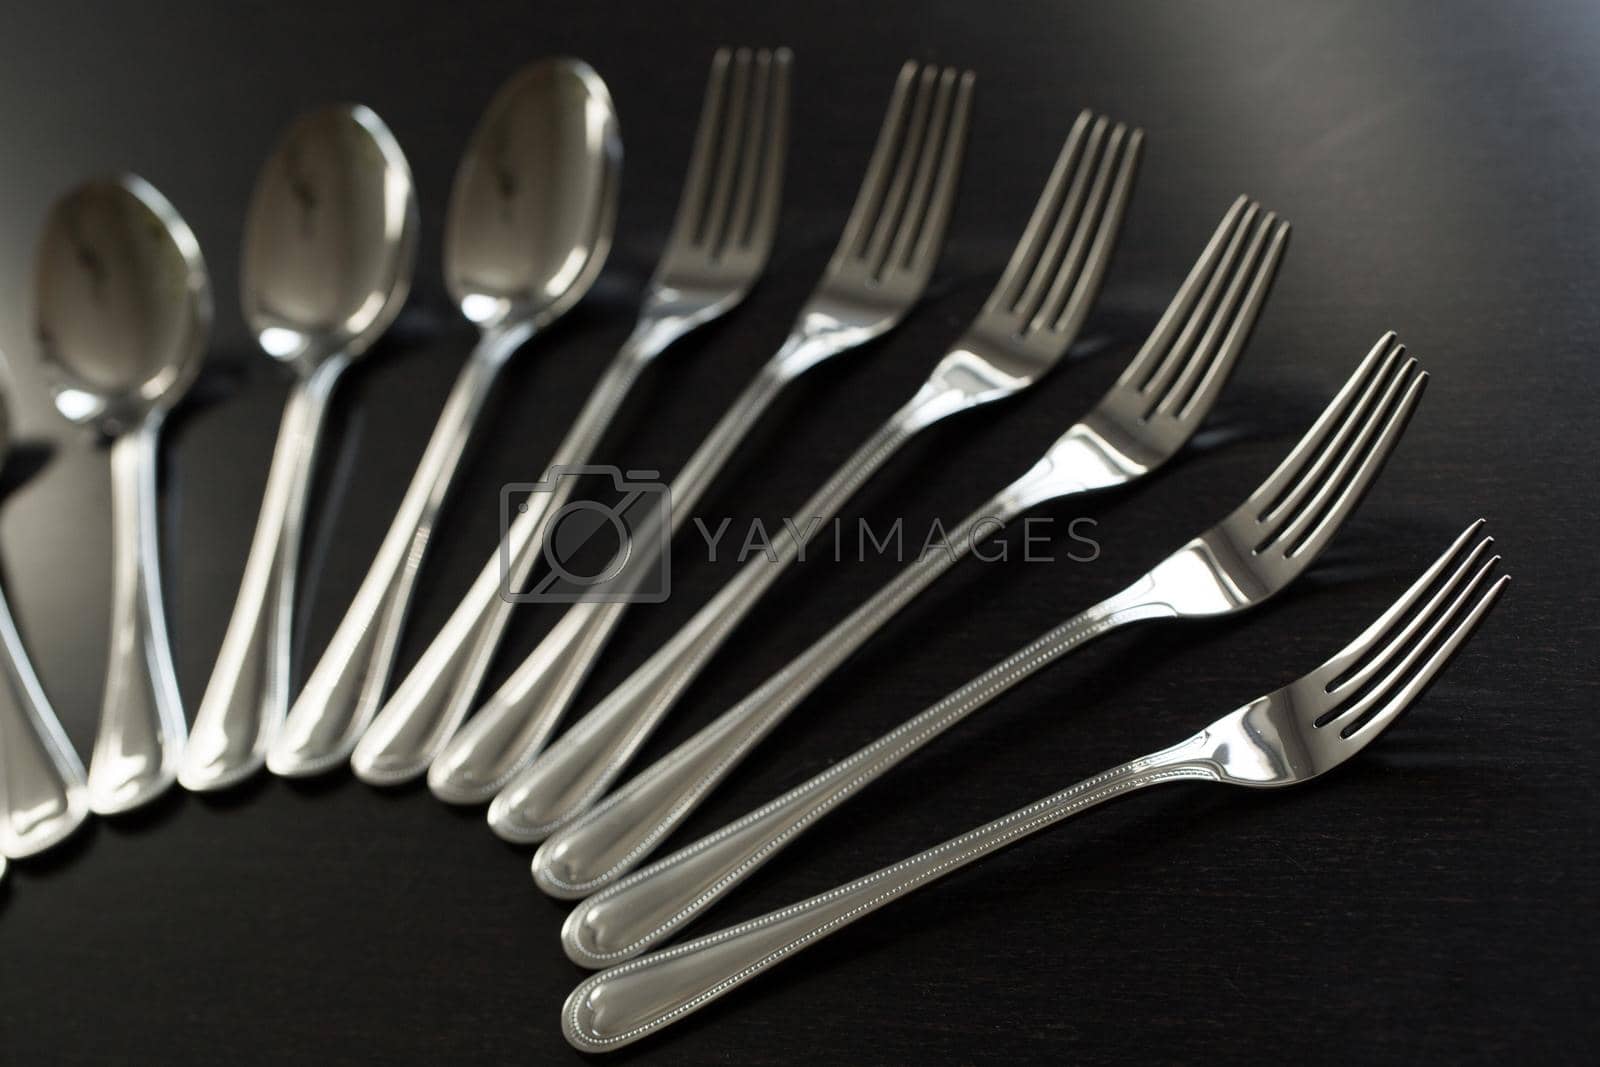 Royalty free image of Cutlery on a black background. Fork, spoon, knife by StudioPeace